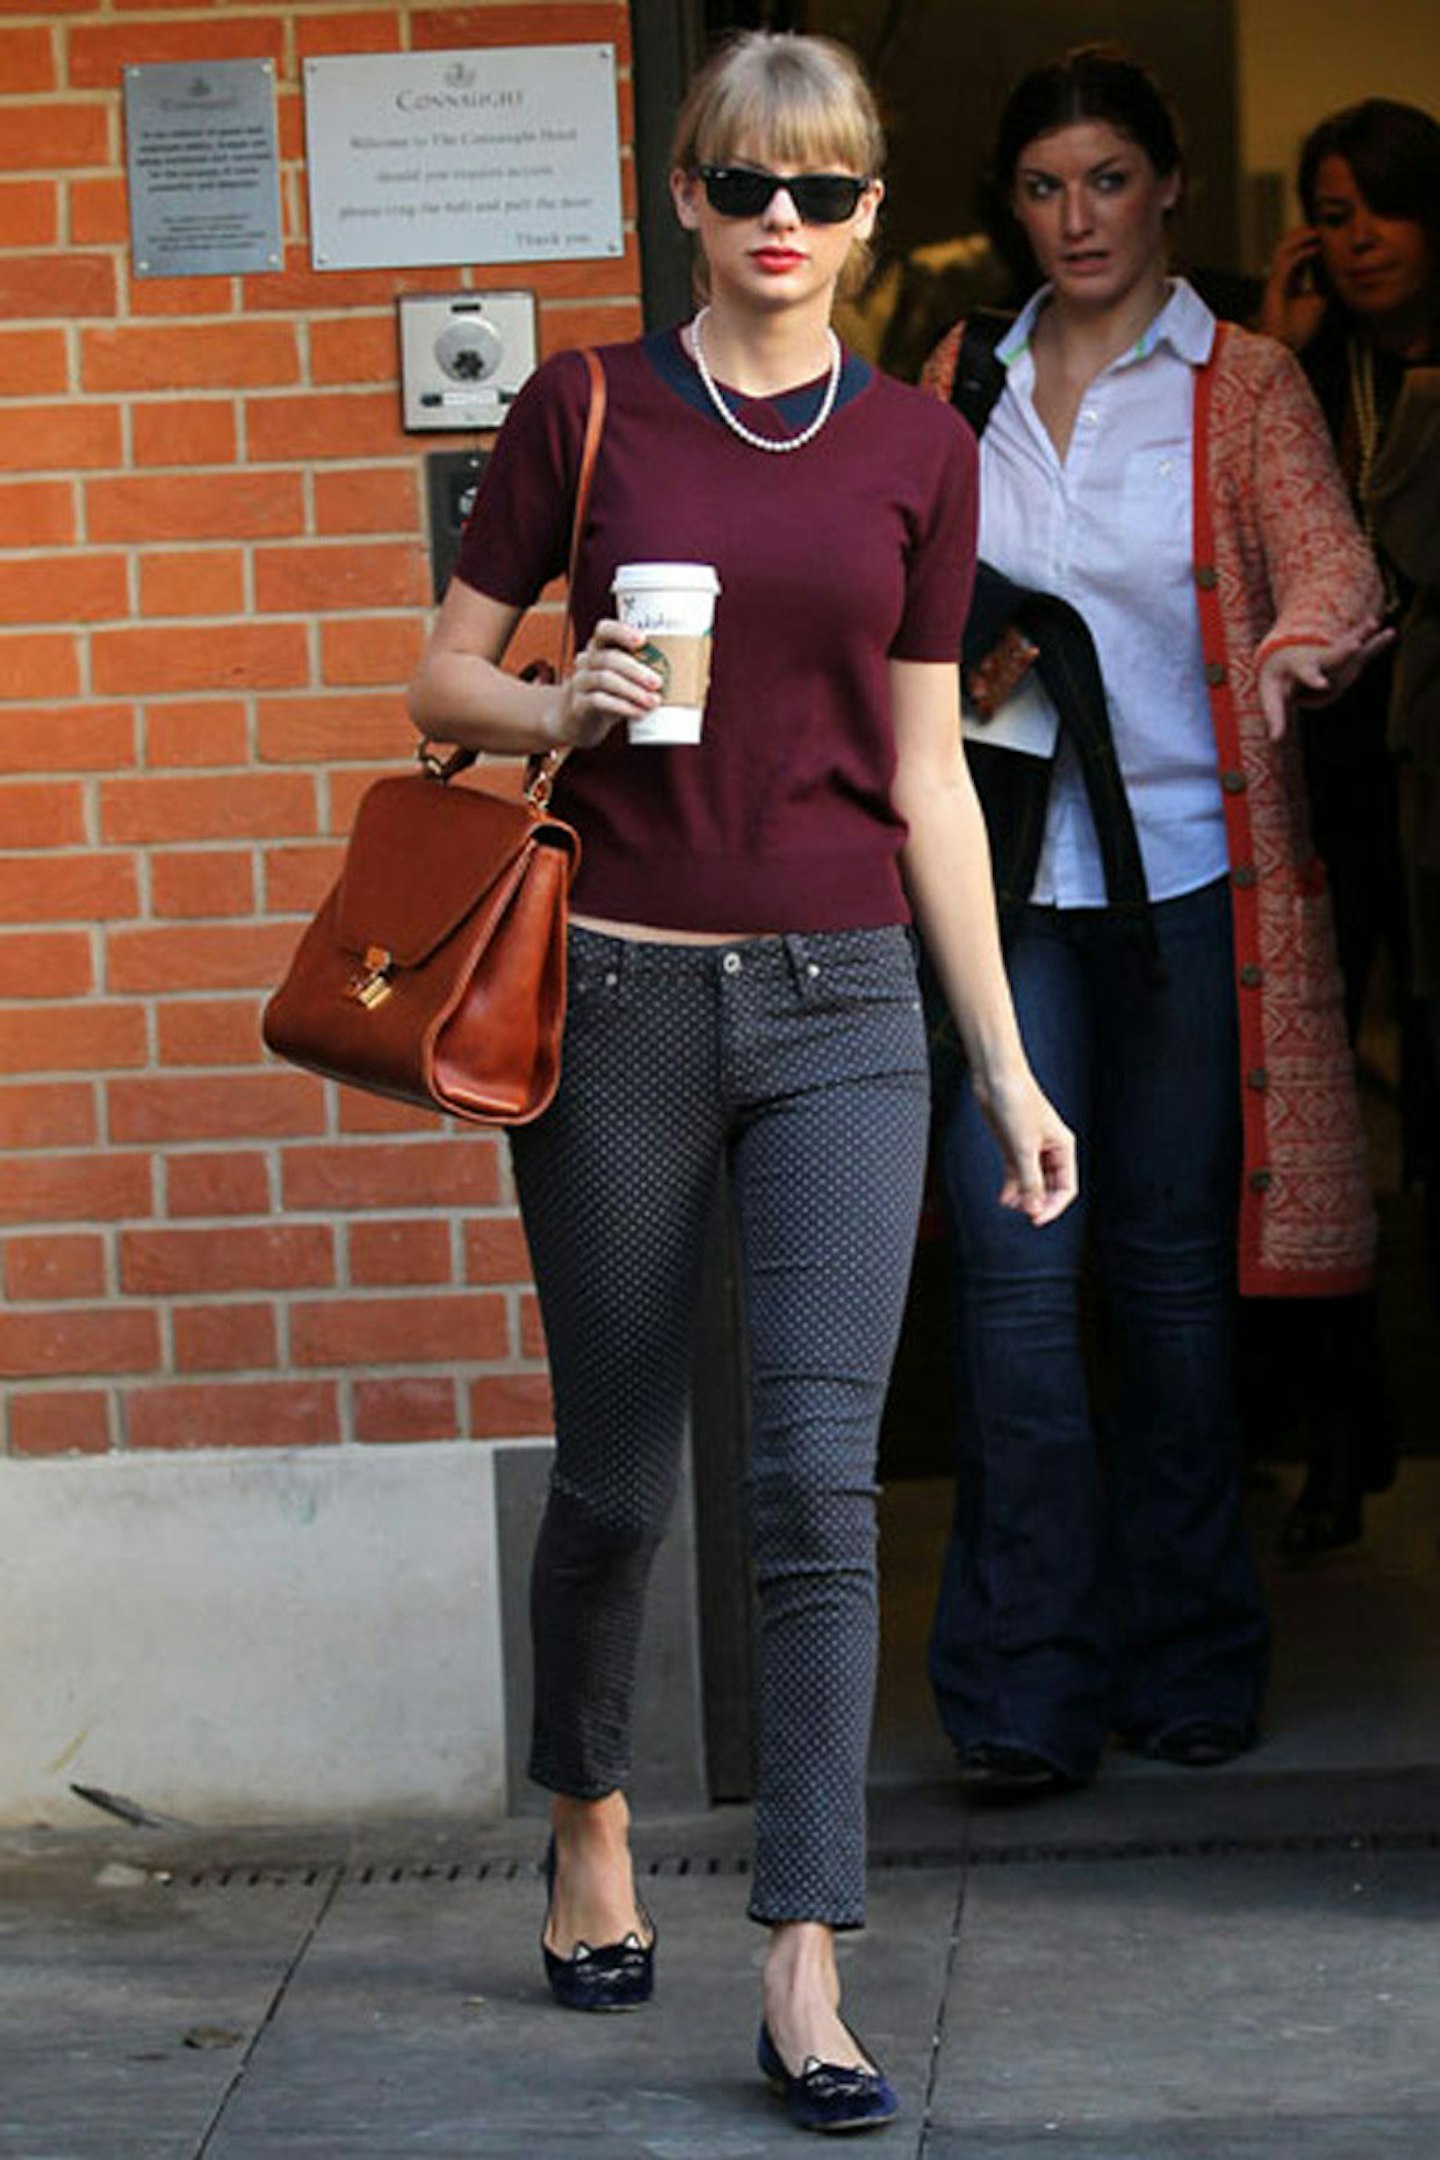 Taylor Swift leaving her hotel in London - 4 October 2012